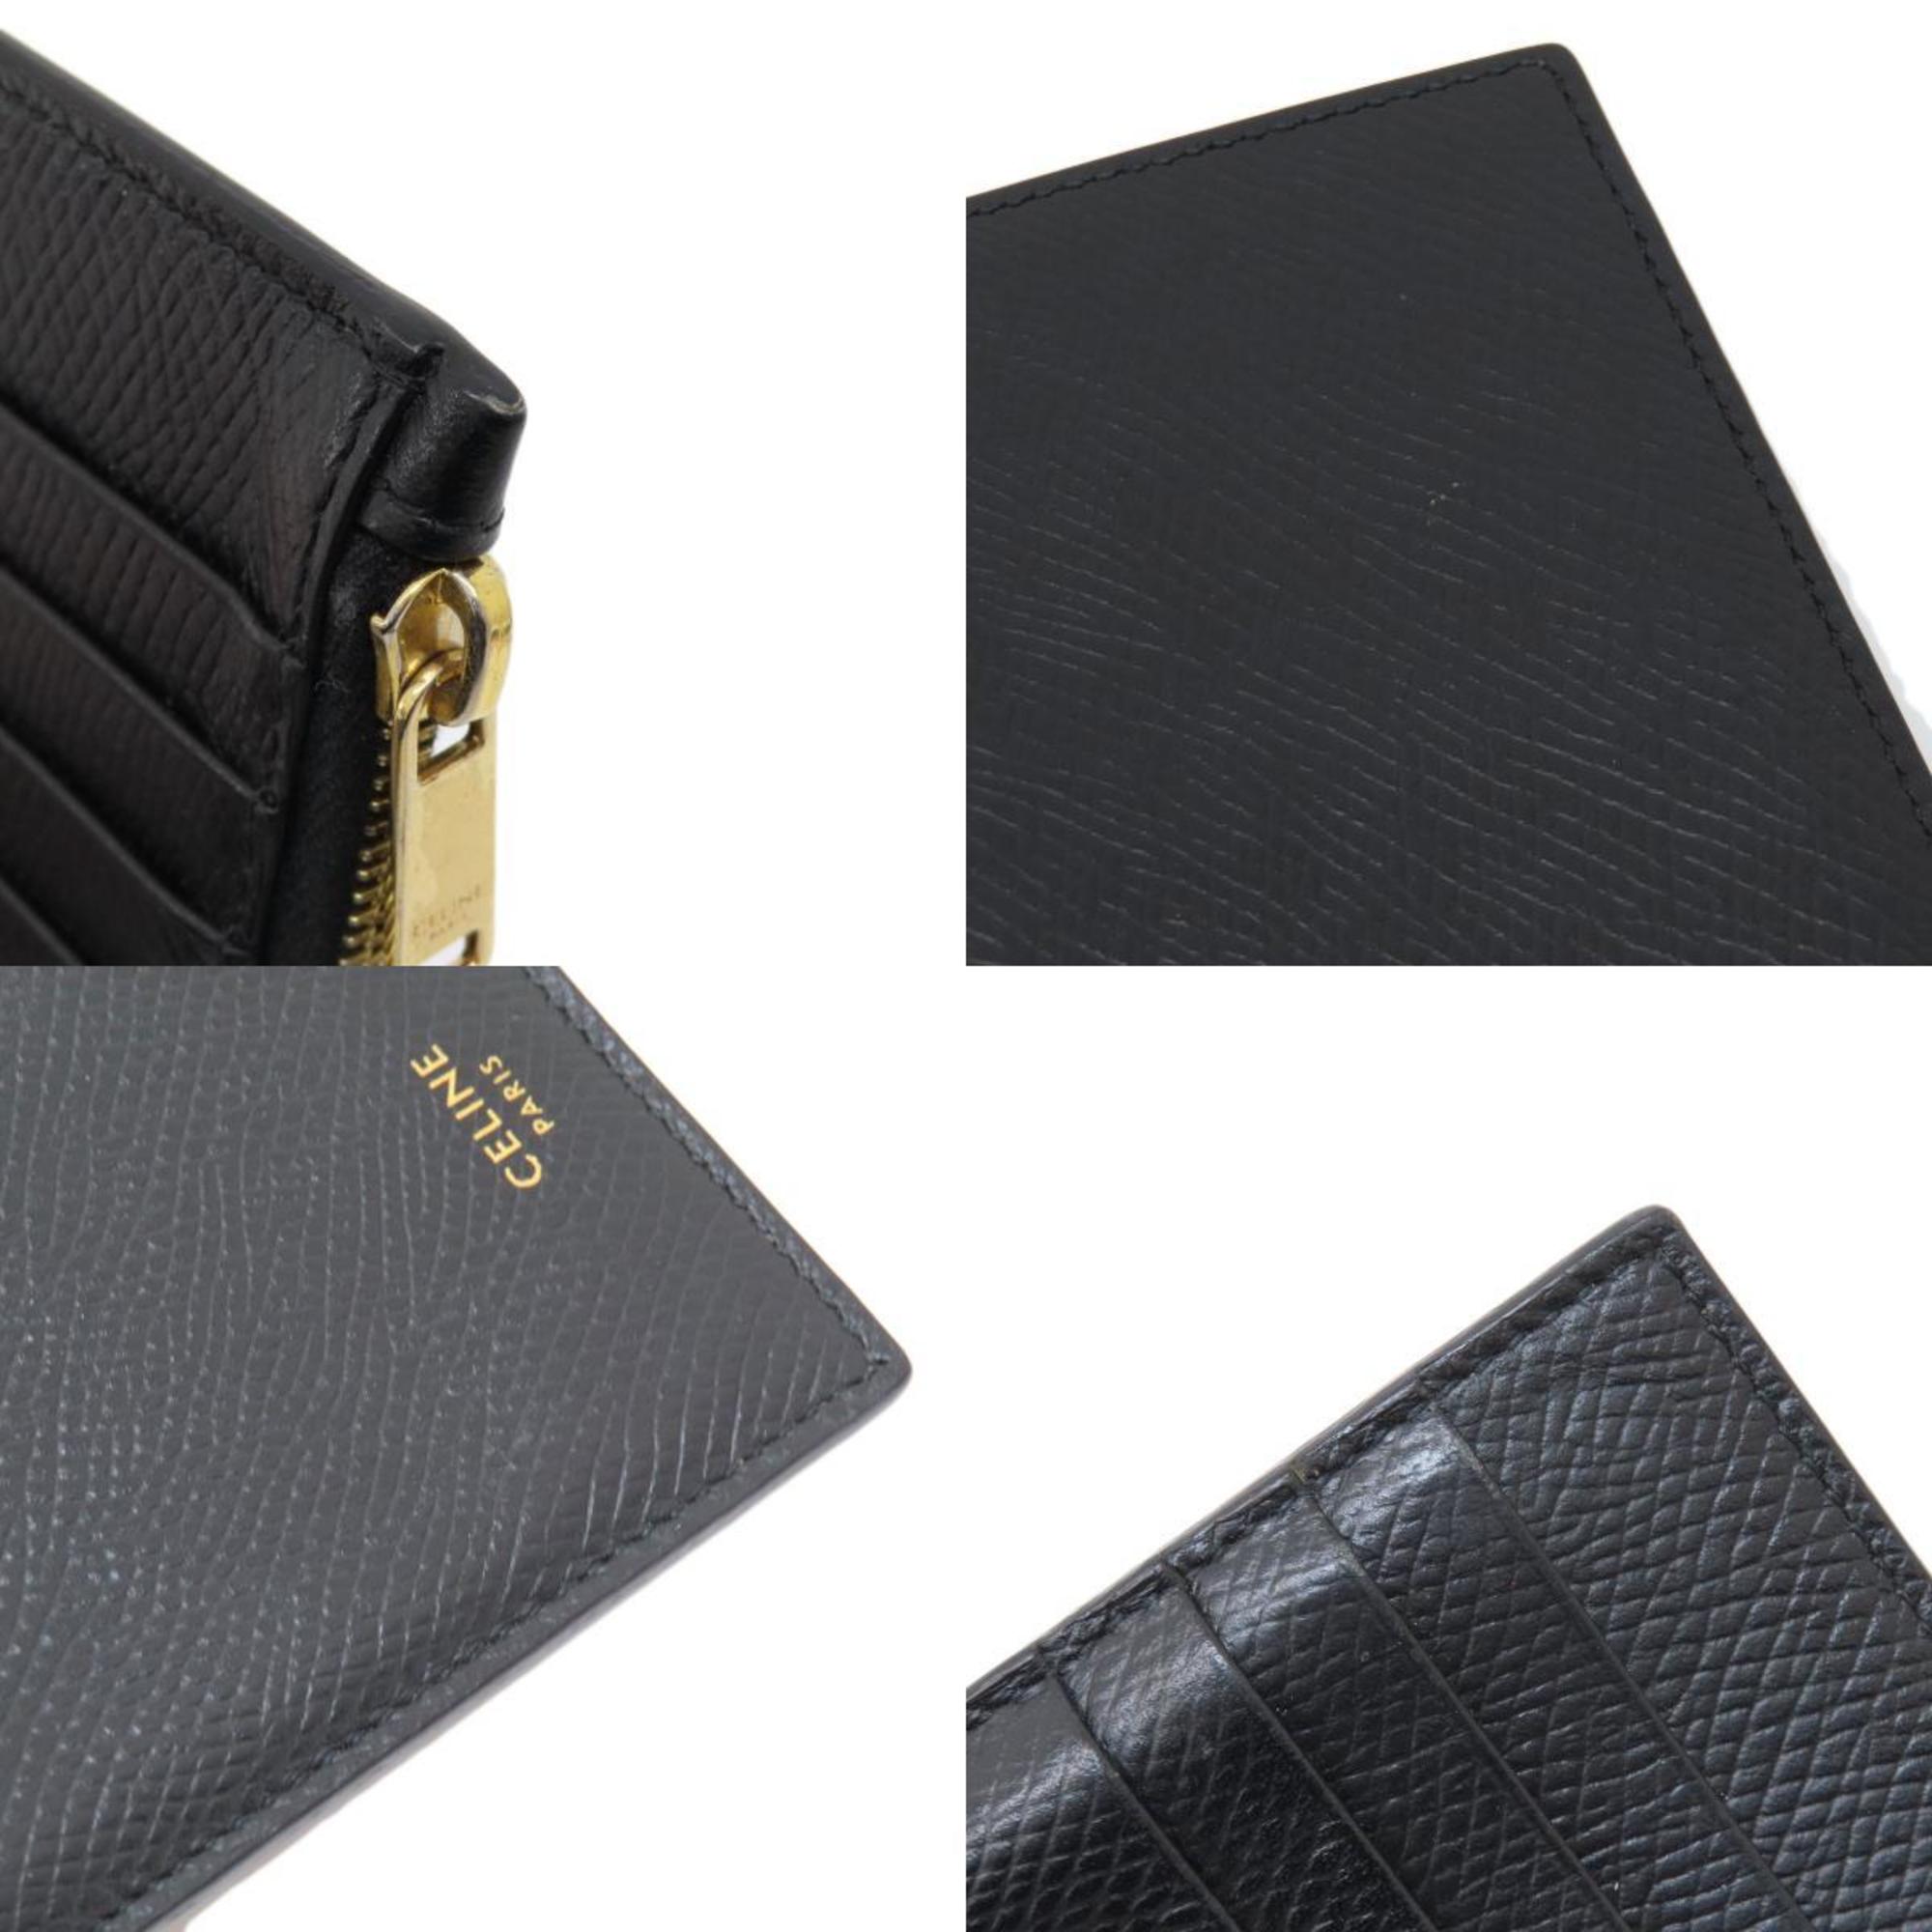 CELINE Card Case Coin Leather Women's